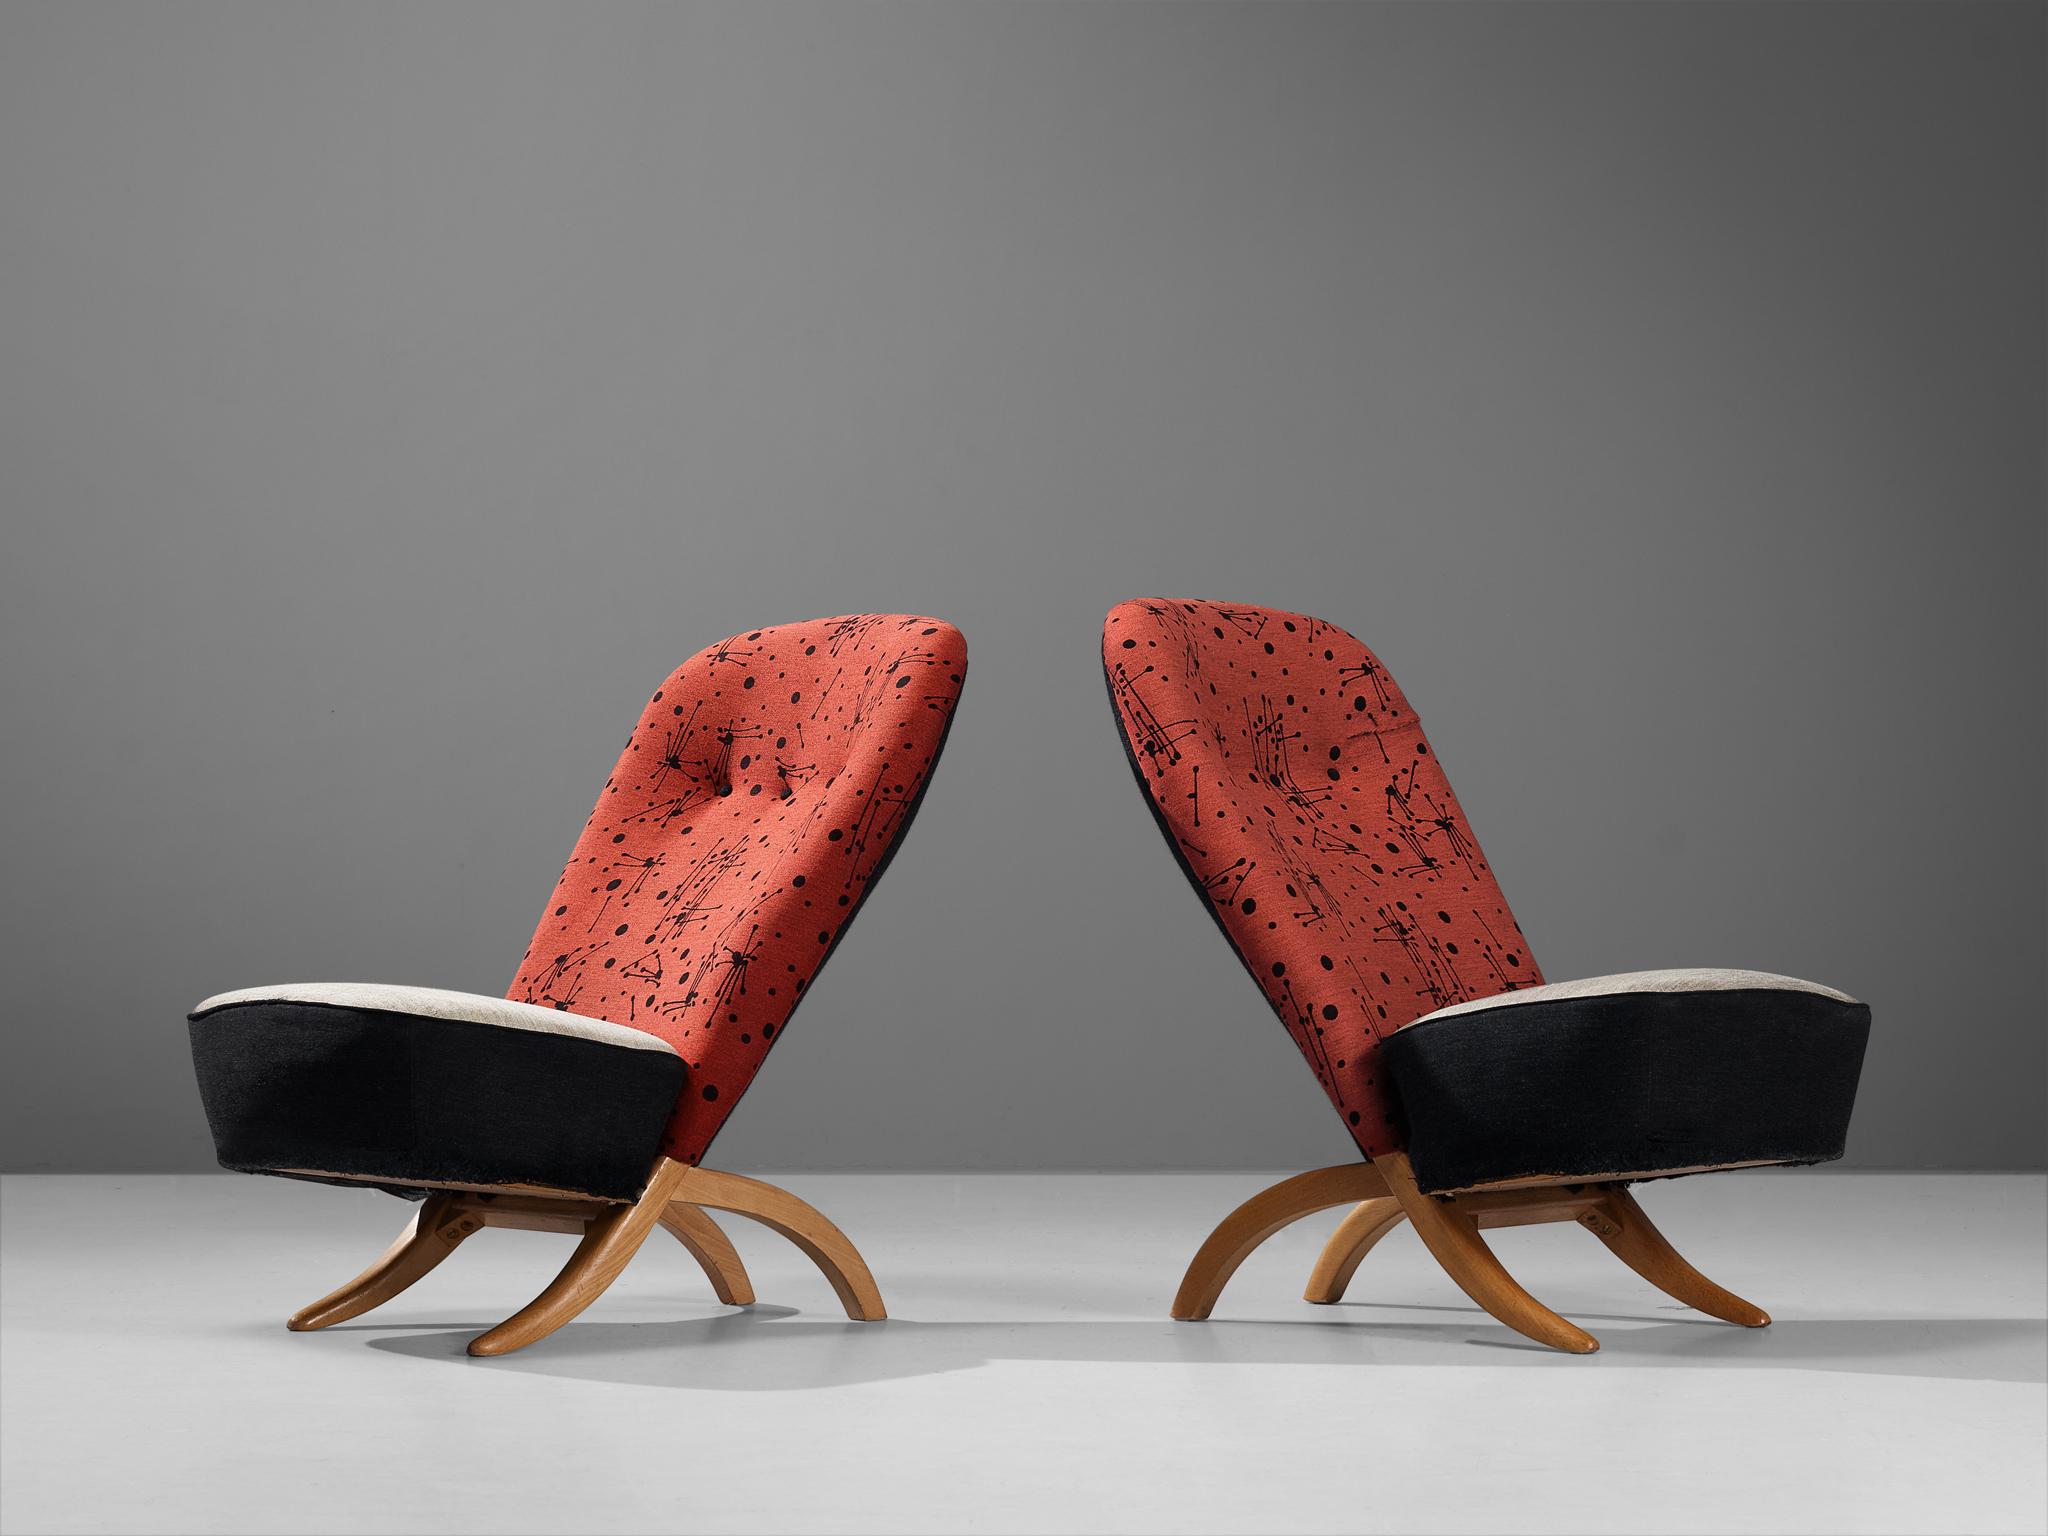 Theo Ruth for Artifort, ‘Congo’ lounge chairs, wood, fabric, The Netherlands, 1952

Set of iconic ‘Congo’ easy chairs by Theo Ruth. These chairs have a unique construction, forced by tension and gravity. The back and seating are two separate